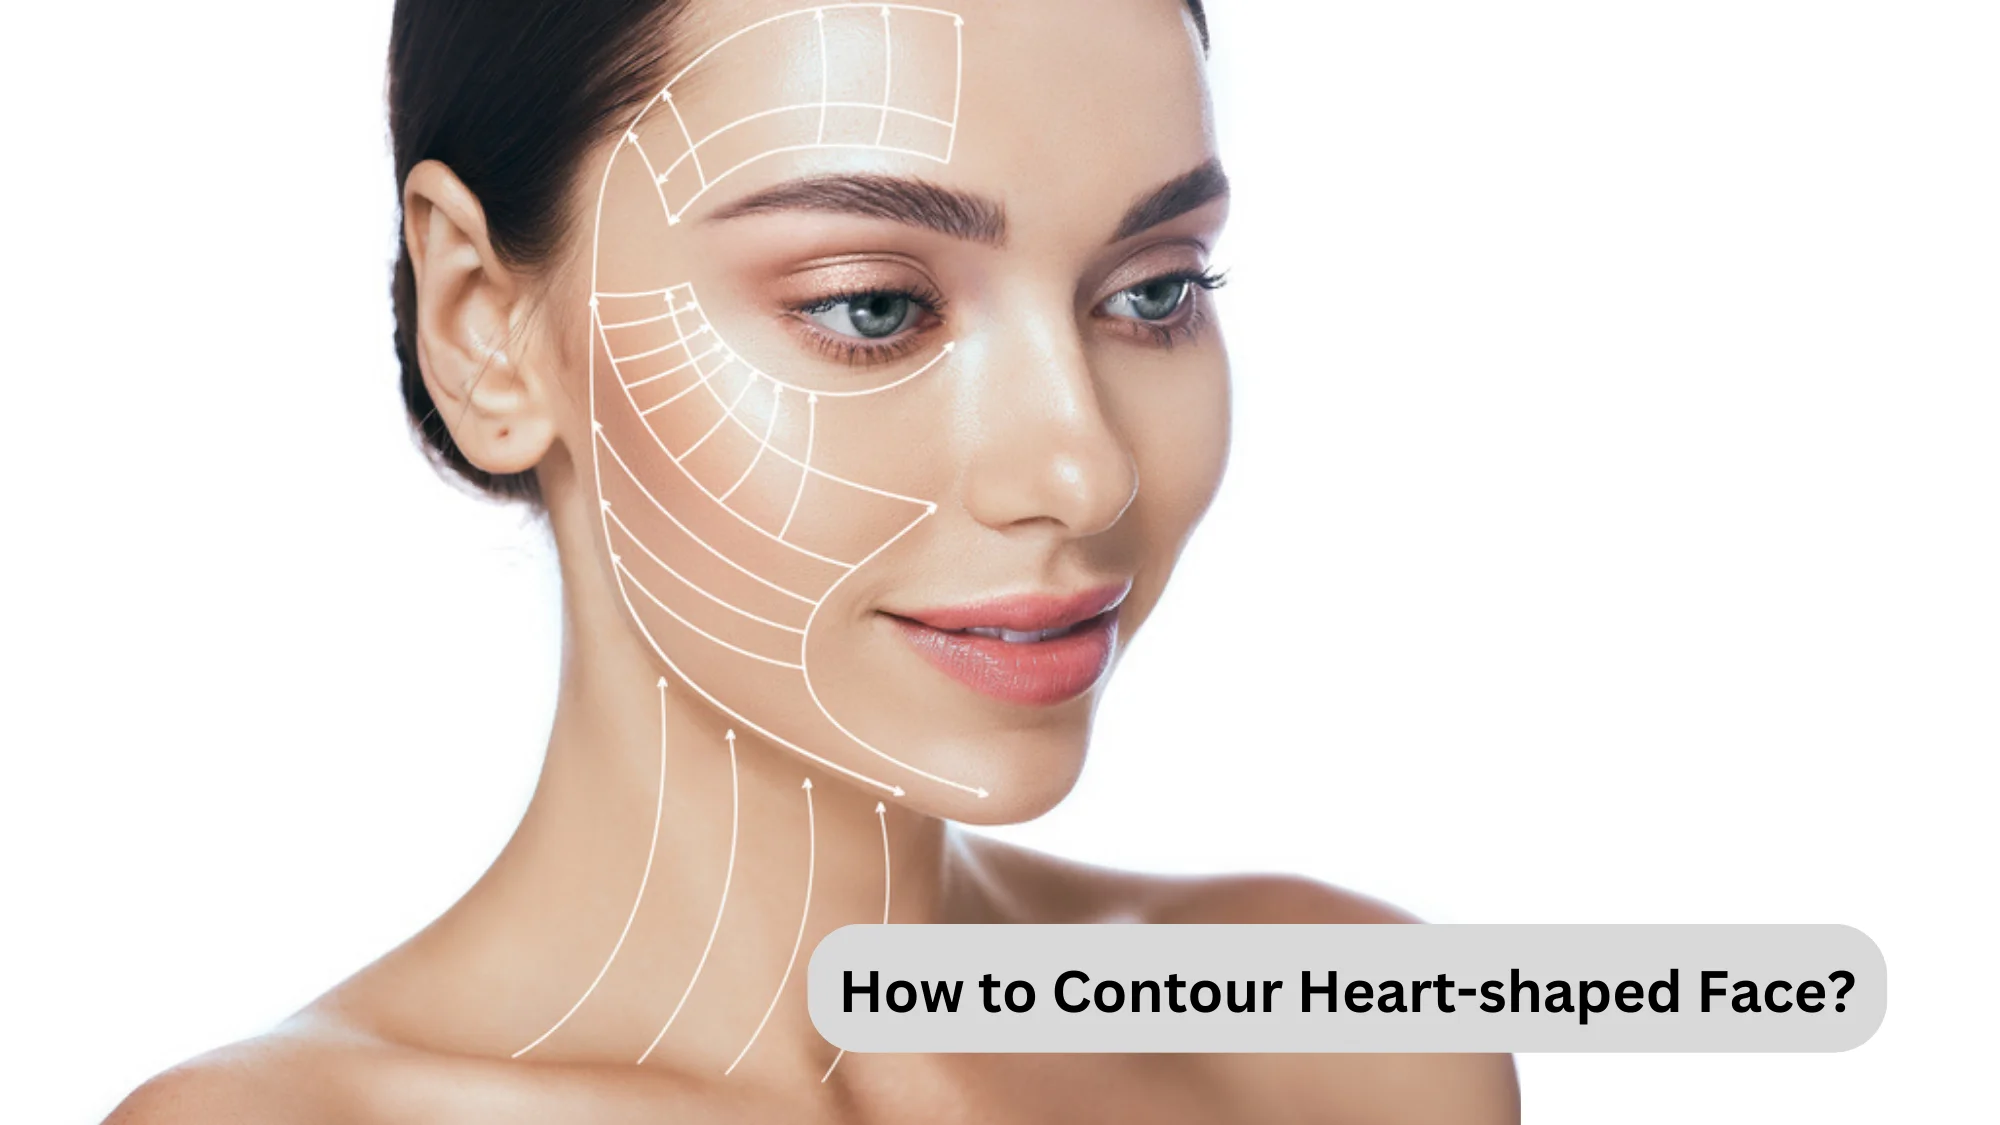 How to Contour Heart-shaped Face?